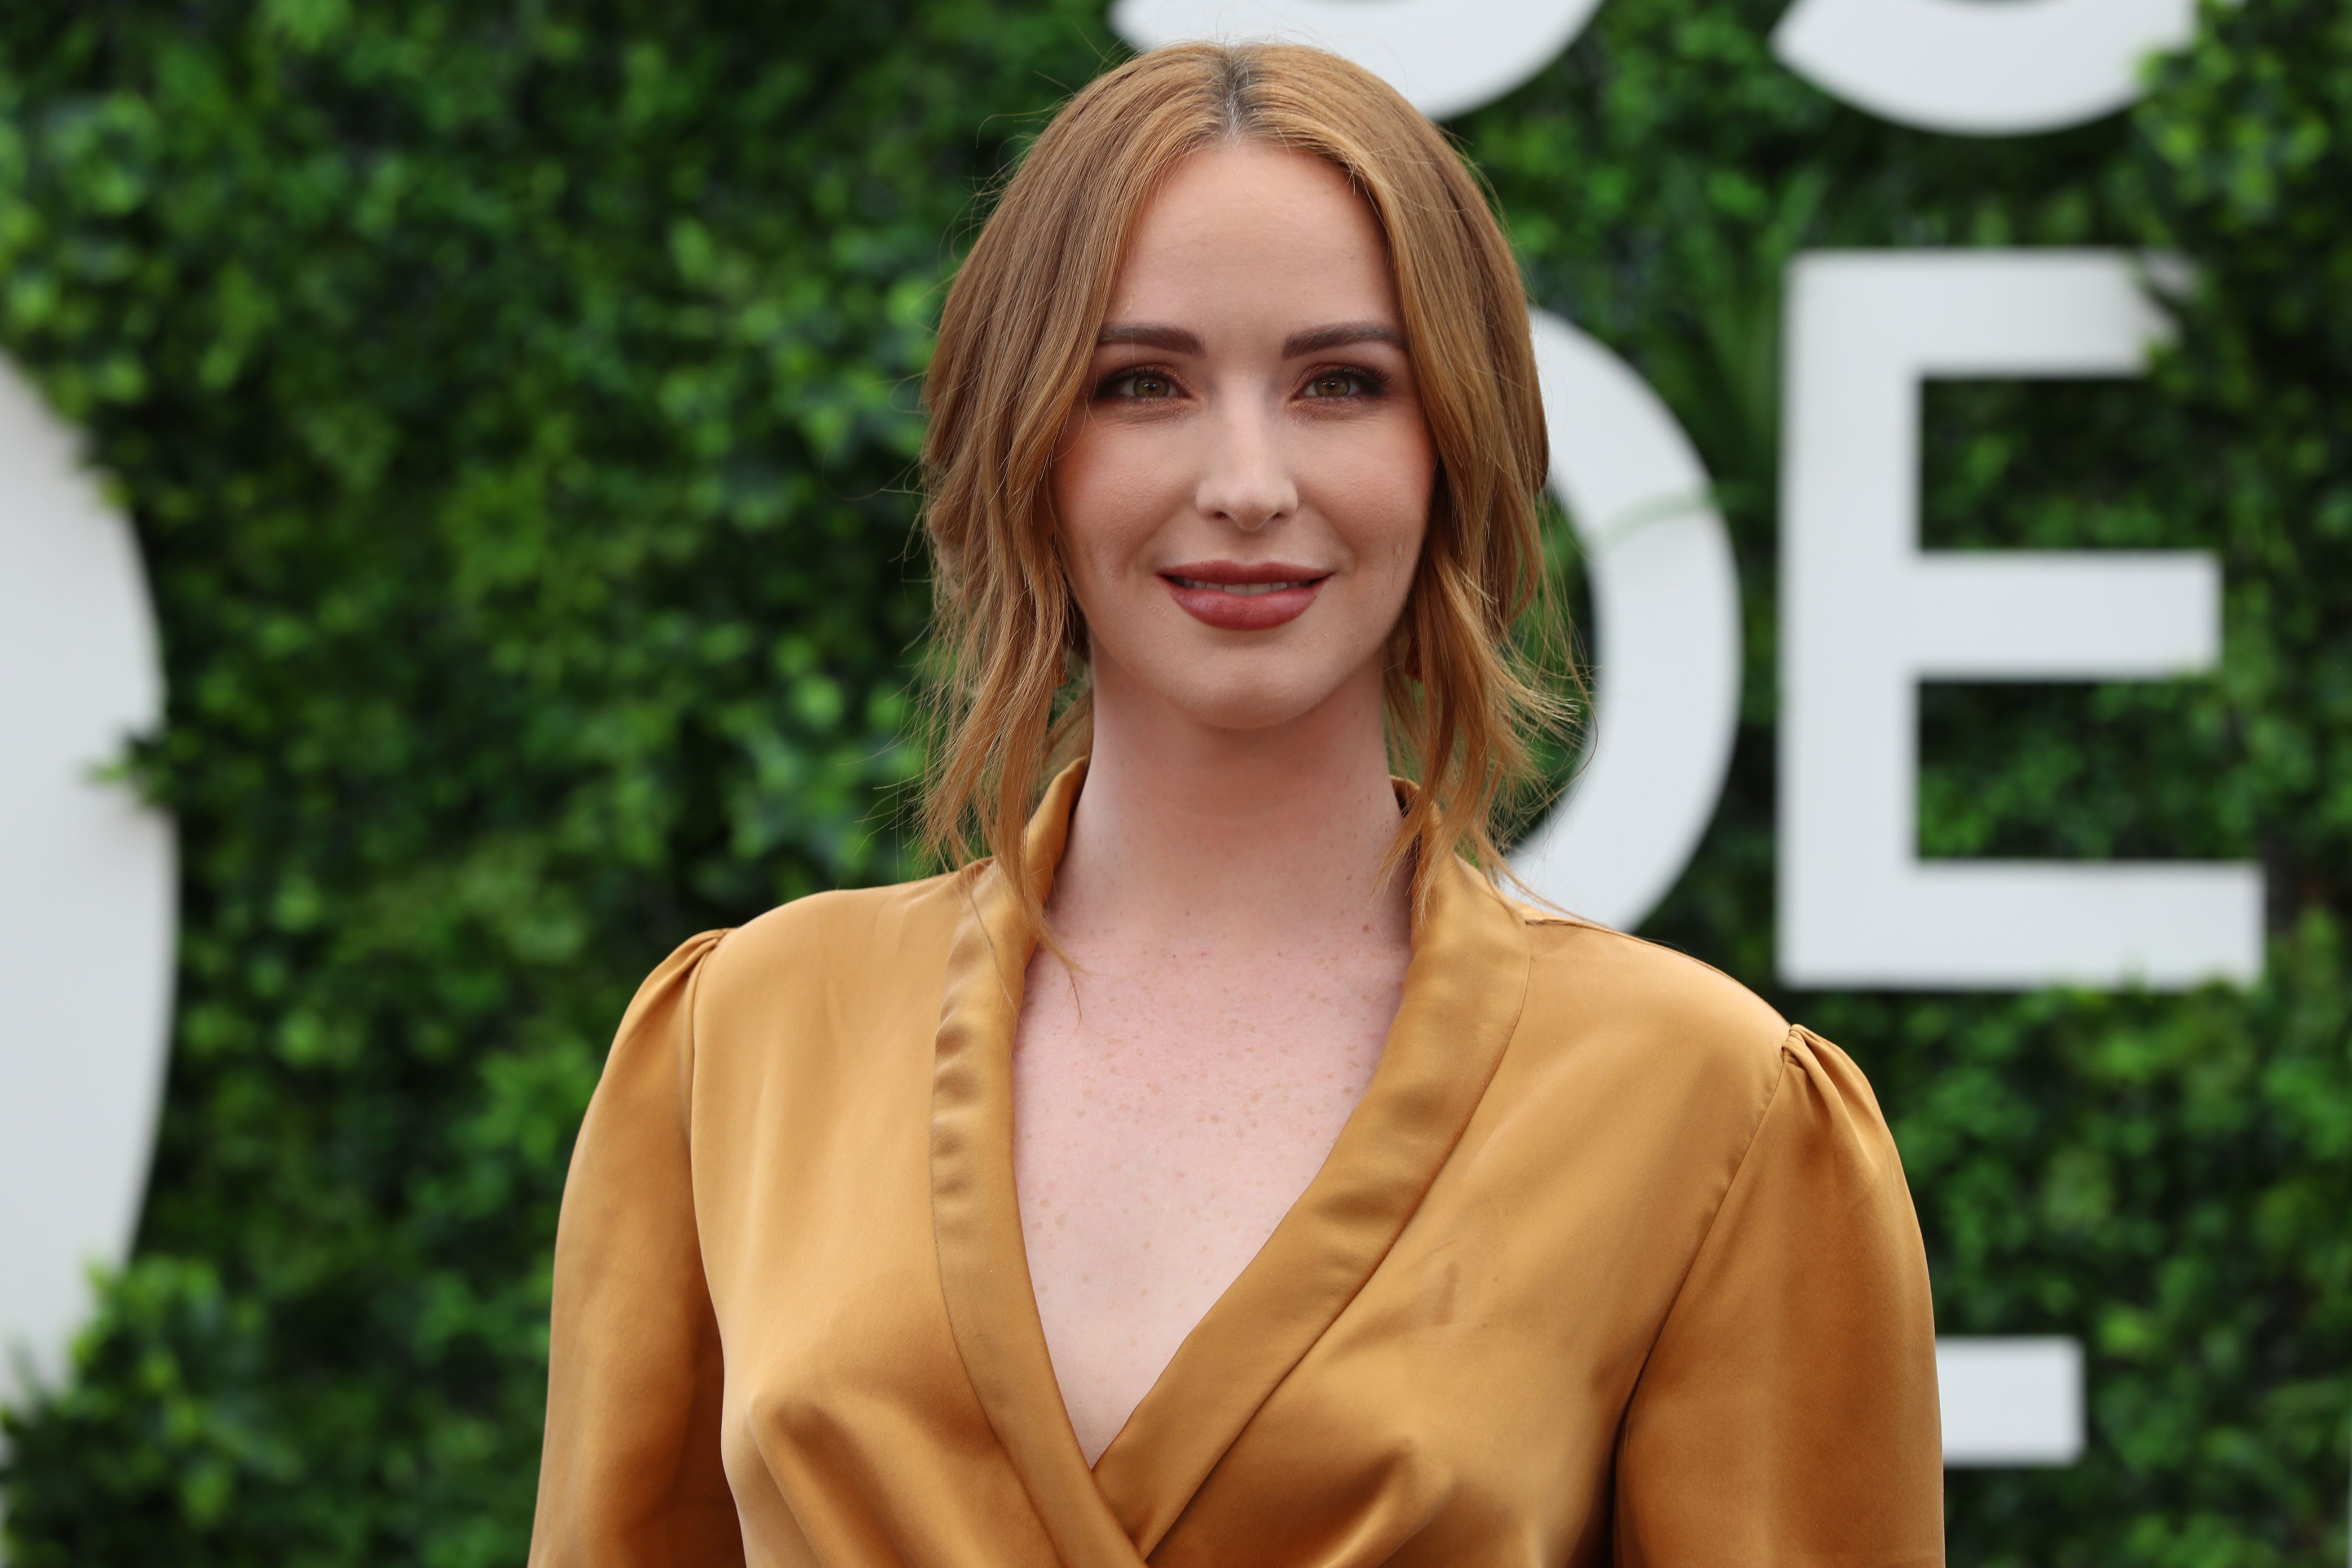 'The Young and the Restless' actor Camryn Grimes wearing a gold dress and posing on the red carpet at the 2019 Monte Carlo TV Festival.